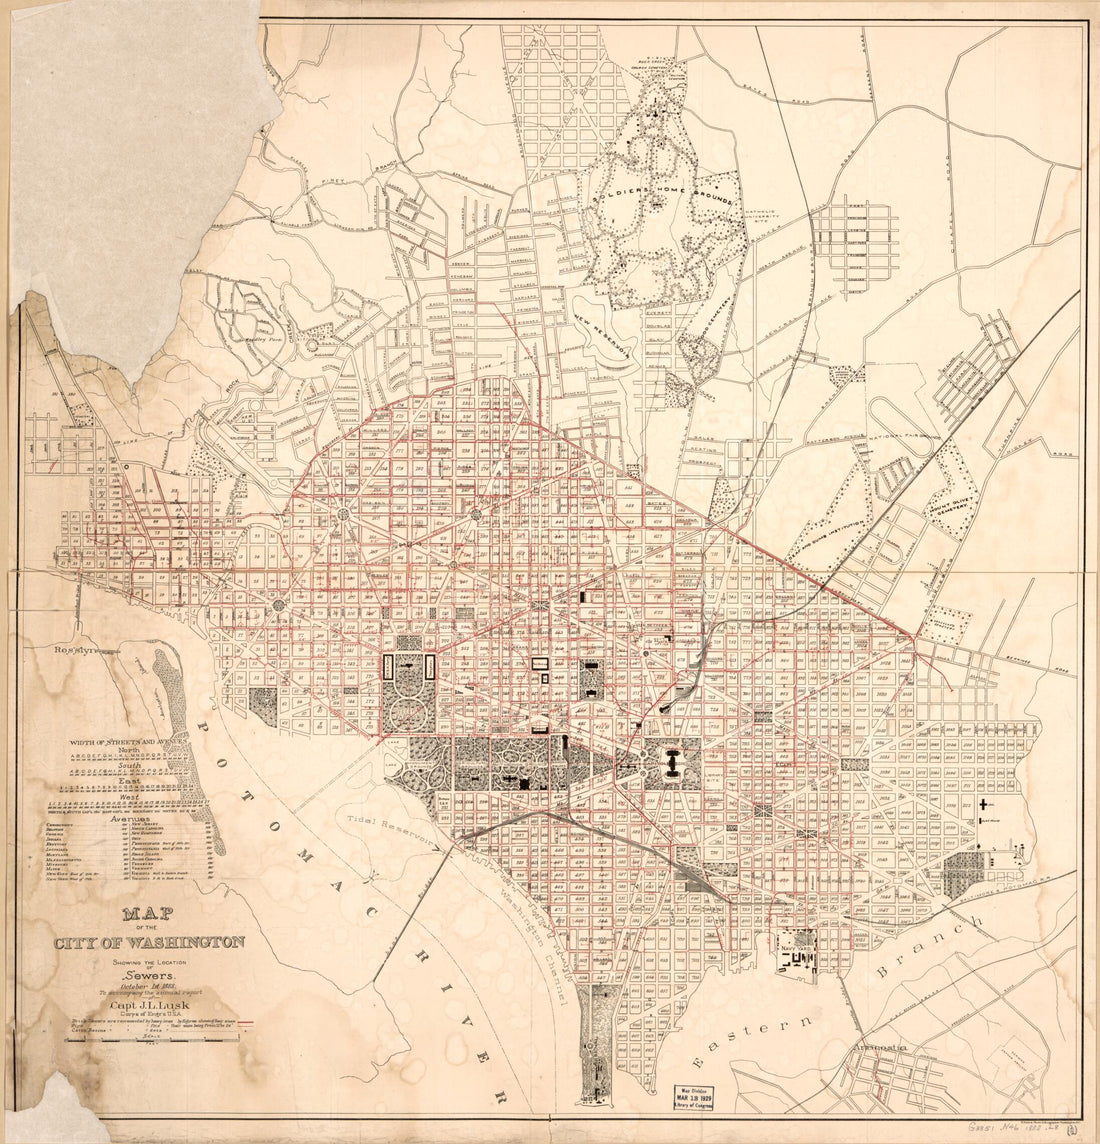 This old map of Map of the City of Washington Showing the Location of Sewers : October 1st from 1888 was created by J. L. (James Loring) Lusk,  United States. Army. Corps of Engineers in 1888